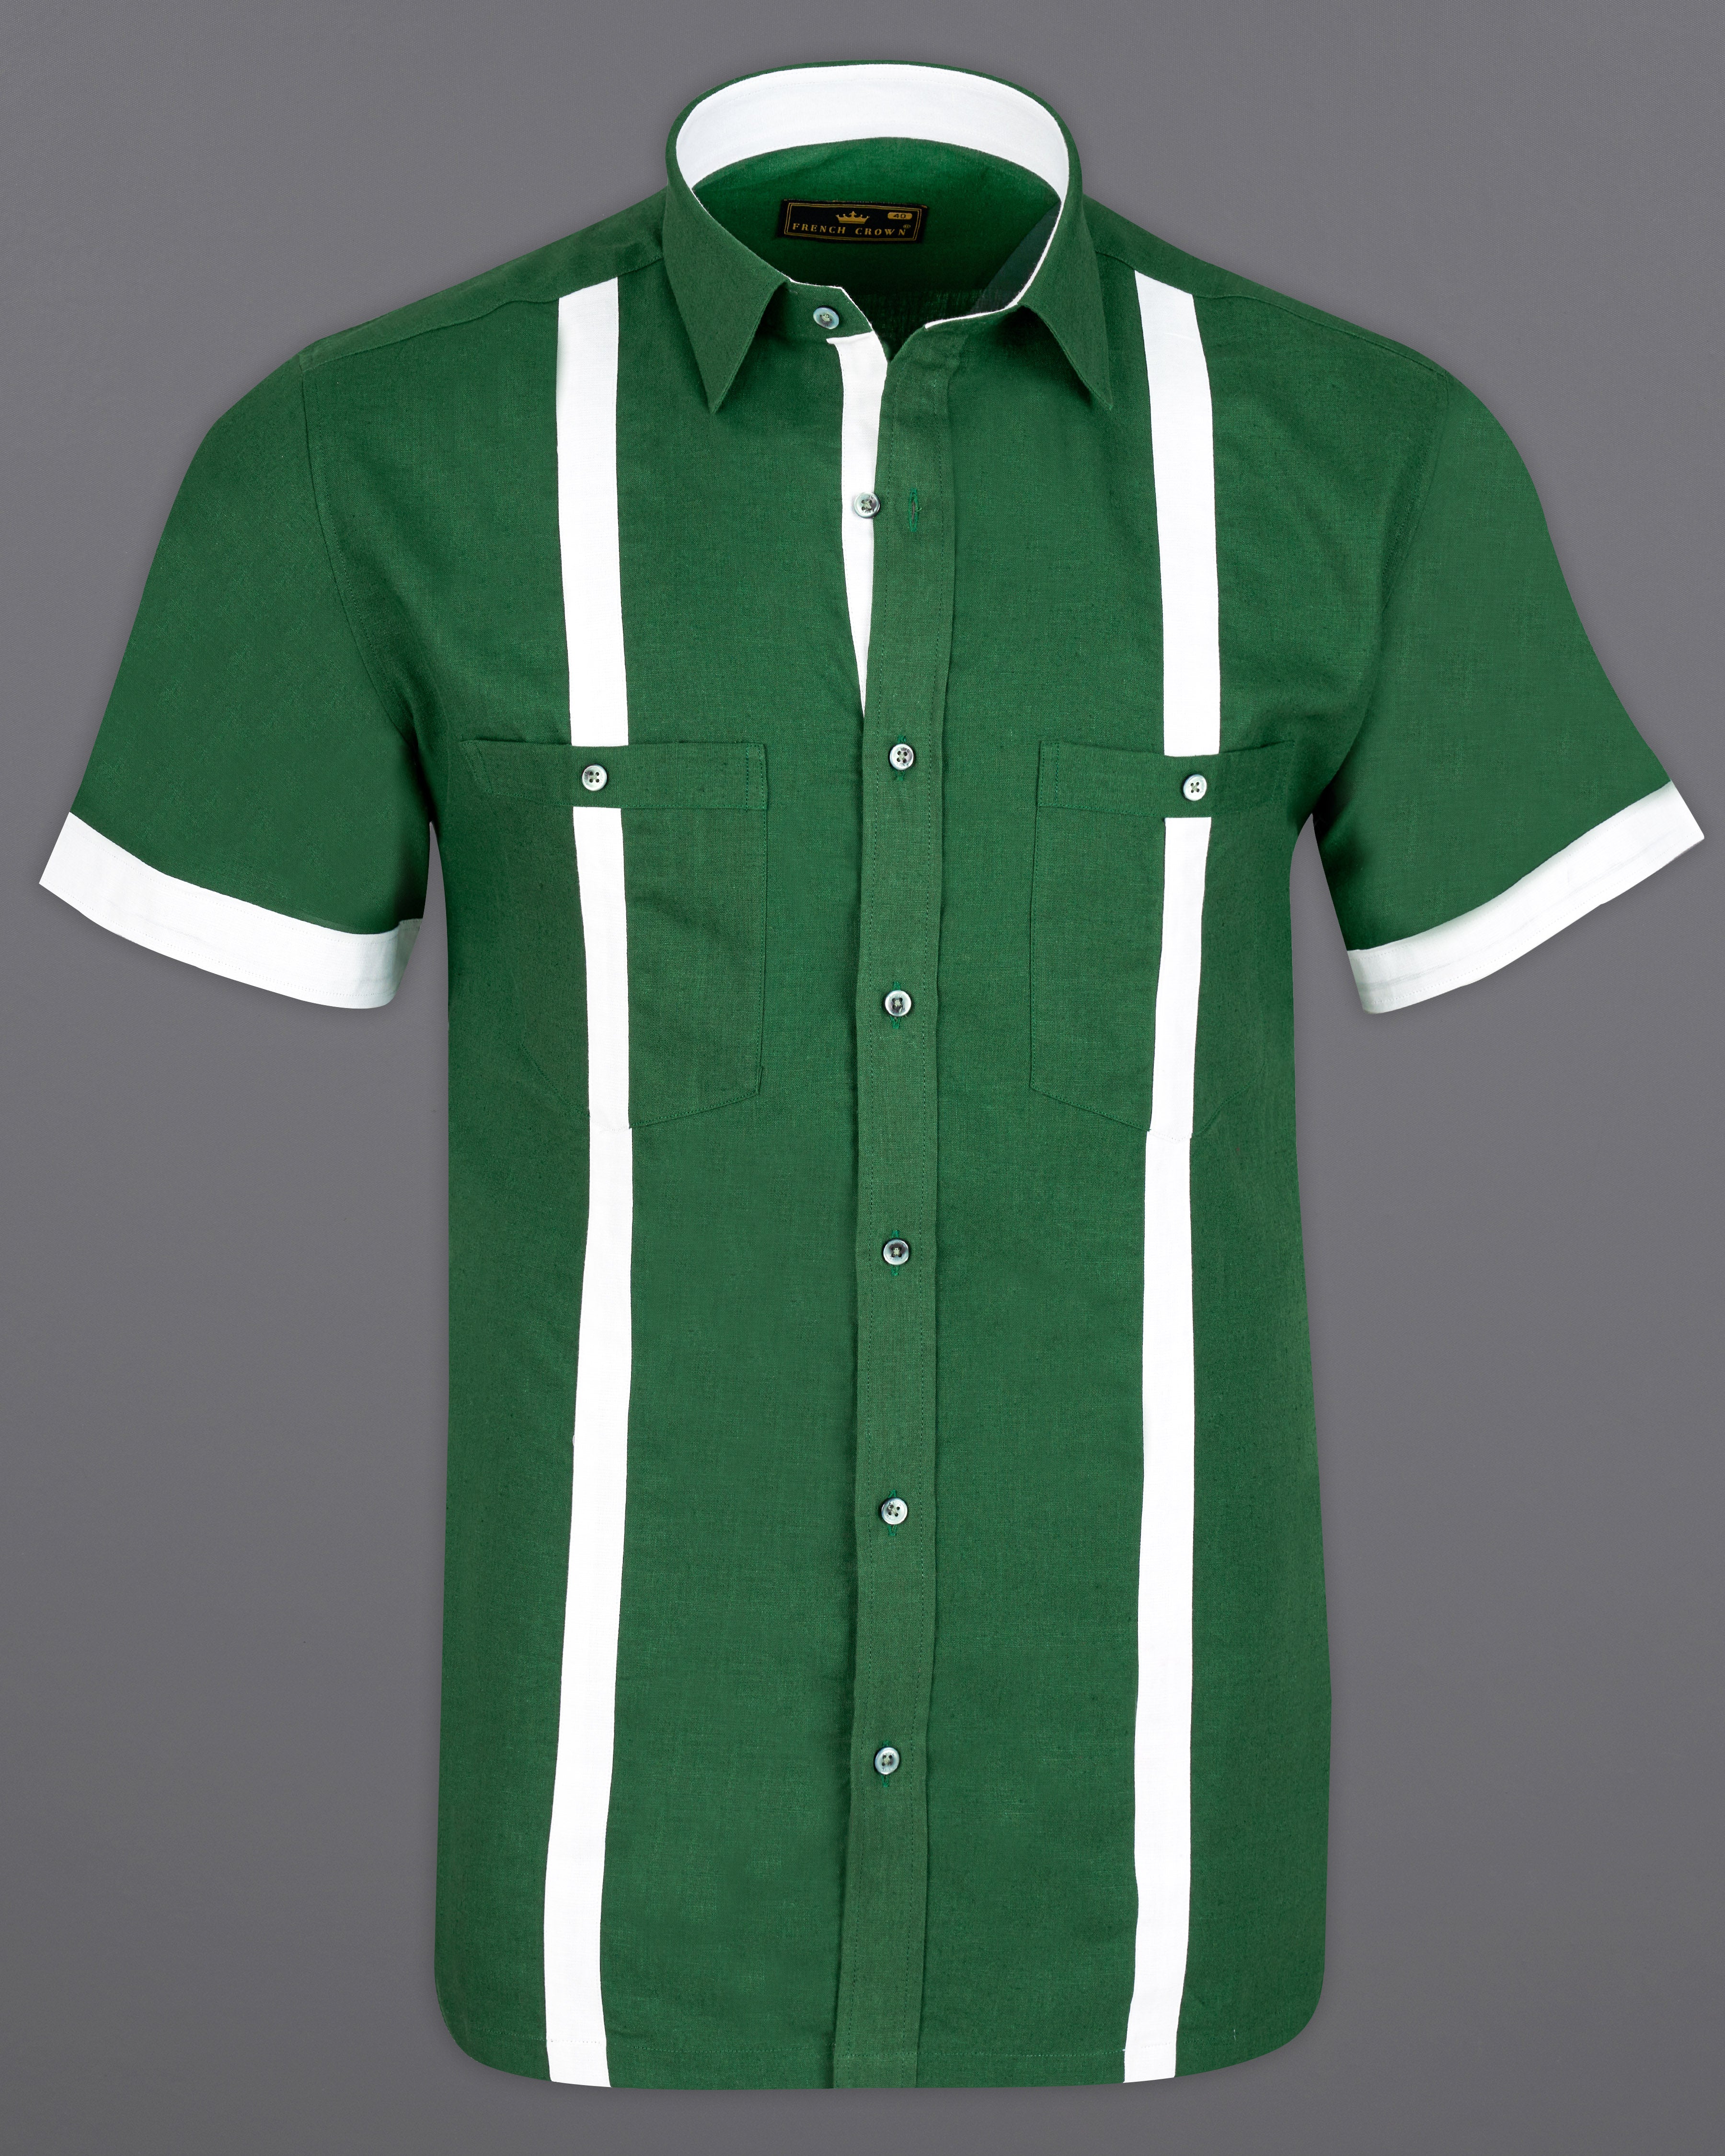 Pantation Green and White Striped Luxurious Linen Designer Shirt 9614-GR-P474-SS-H-38, 9614-GR-P474-SS-H-39, 9614-GR-P474-SS-H-40, 9614-GR-P474-SS-H-42, 9614-GR-P474-SS-H-44, 9614-GR-P474-SS-H-46, 9614-GR-P474-SS-H-48, 9614-GR-P474-SS-H-50, 9614-GR-P474-SS-H-52